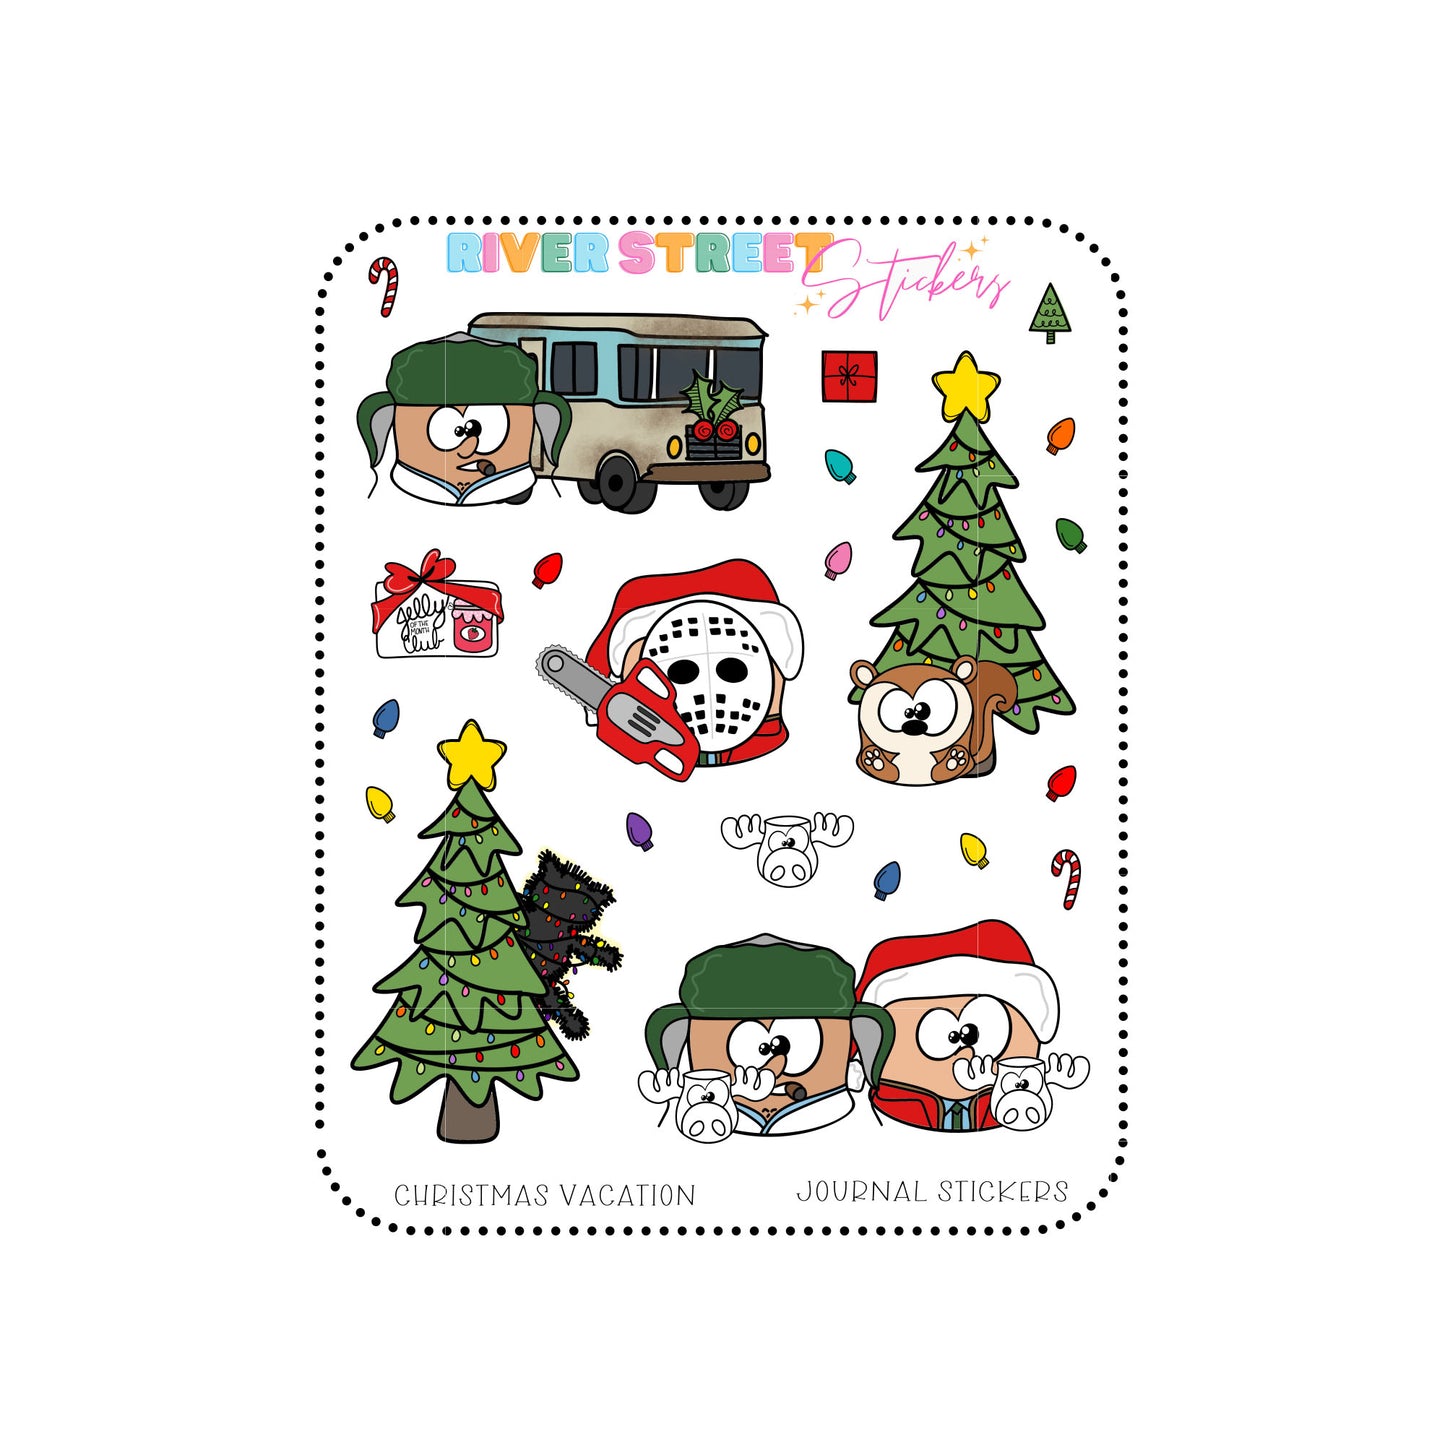 CD Christmas Vacation Journal Stickers